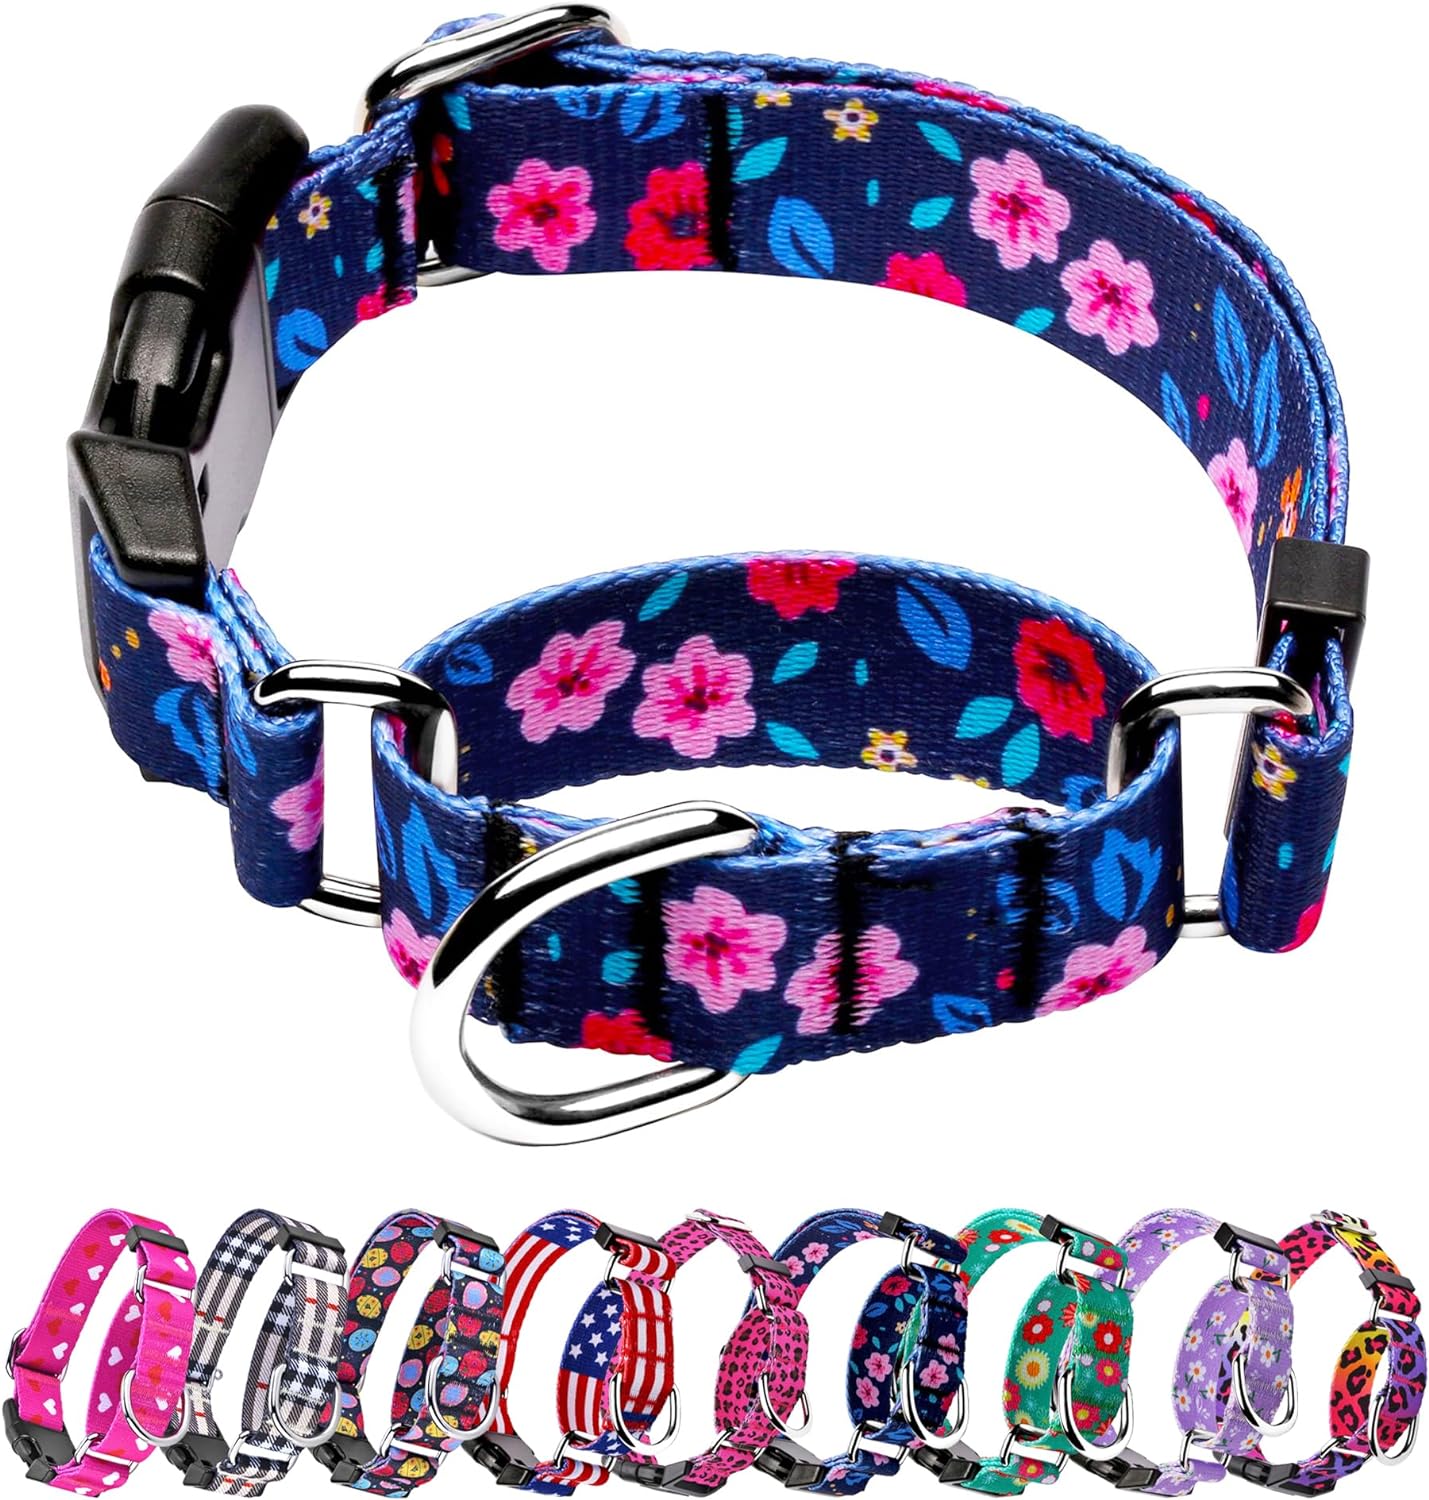 Martingale Collar for Dogs, Adjustable Soft Nylon Dog Collars with Special Design Cute Patterns for Small Medium Large Dog